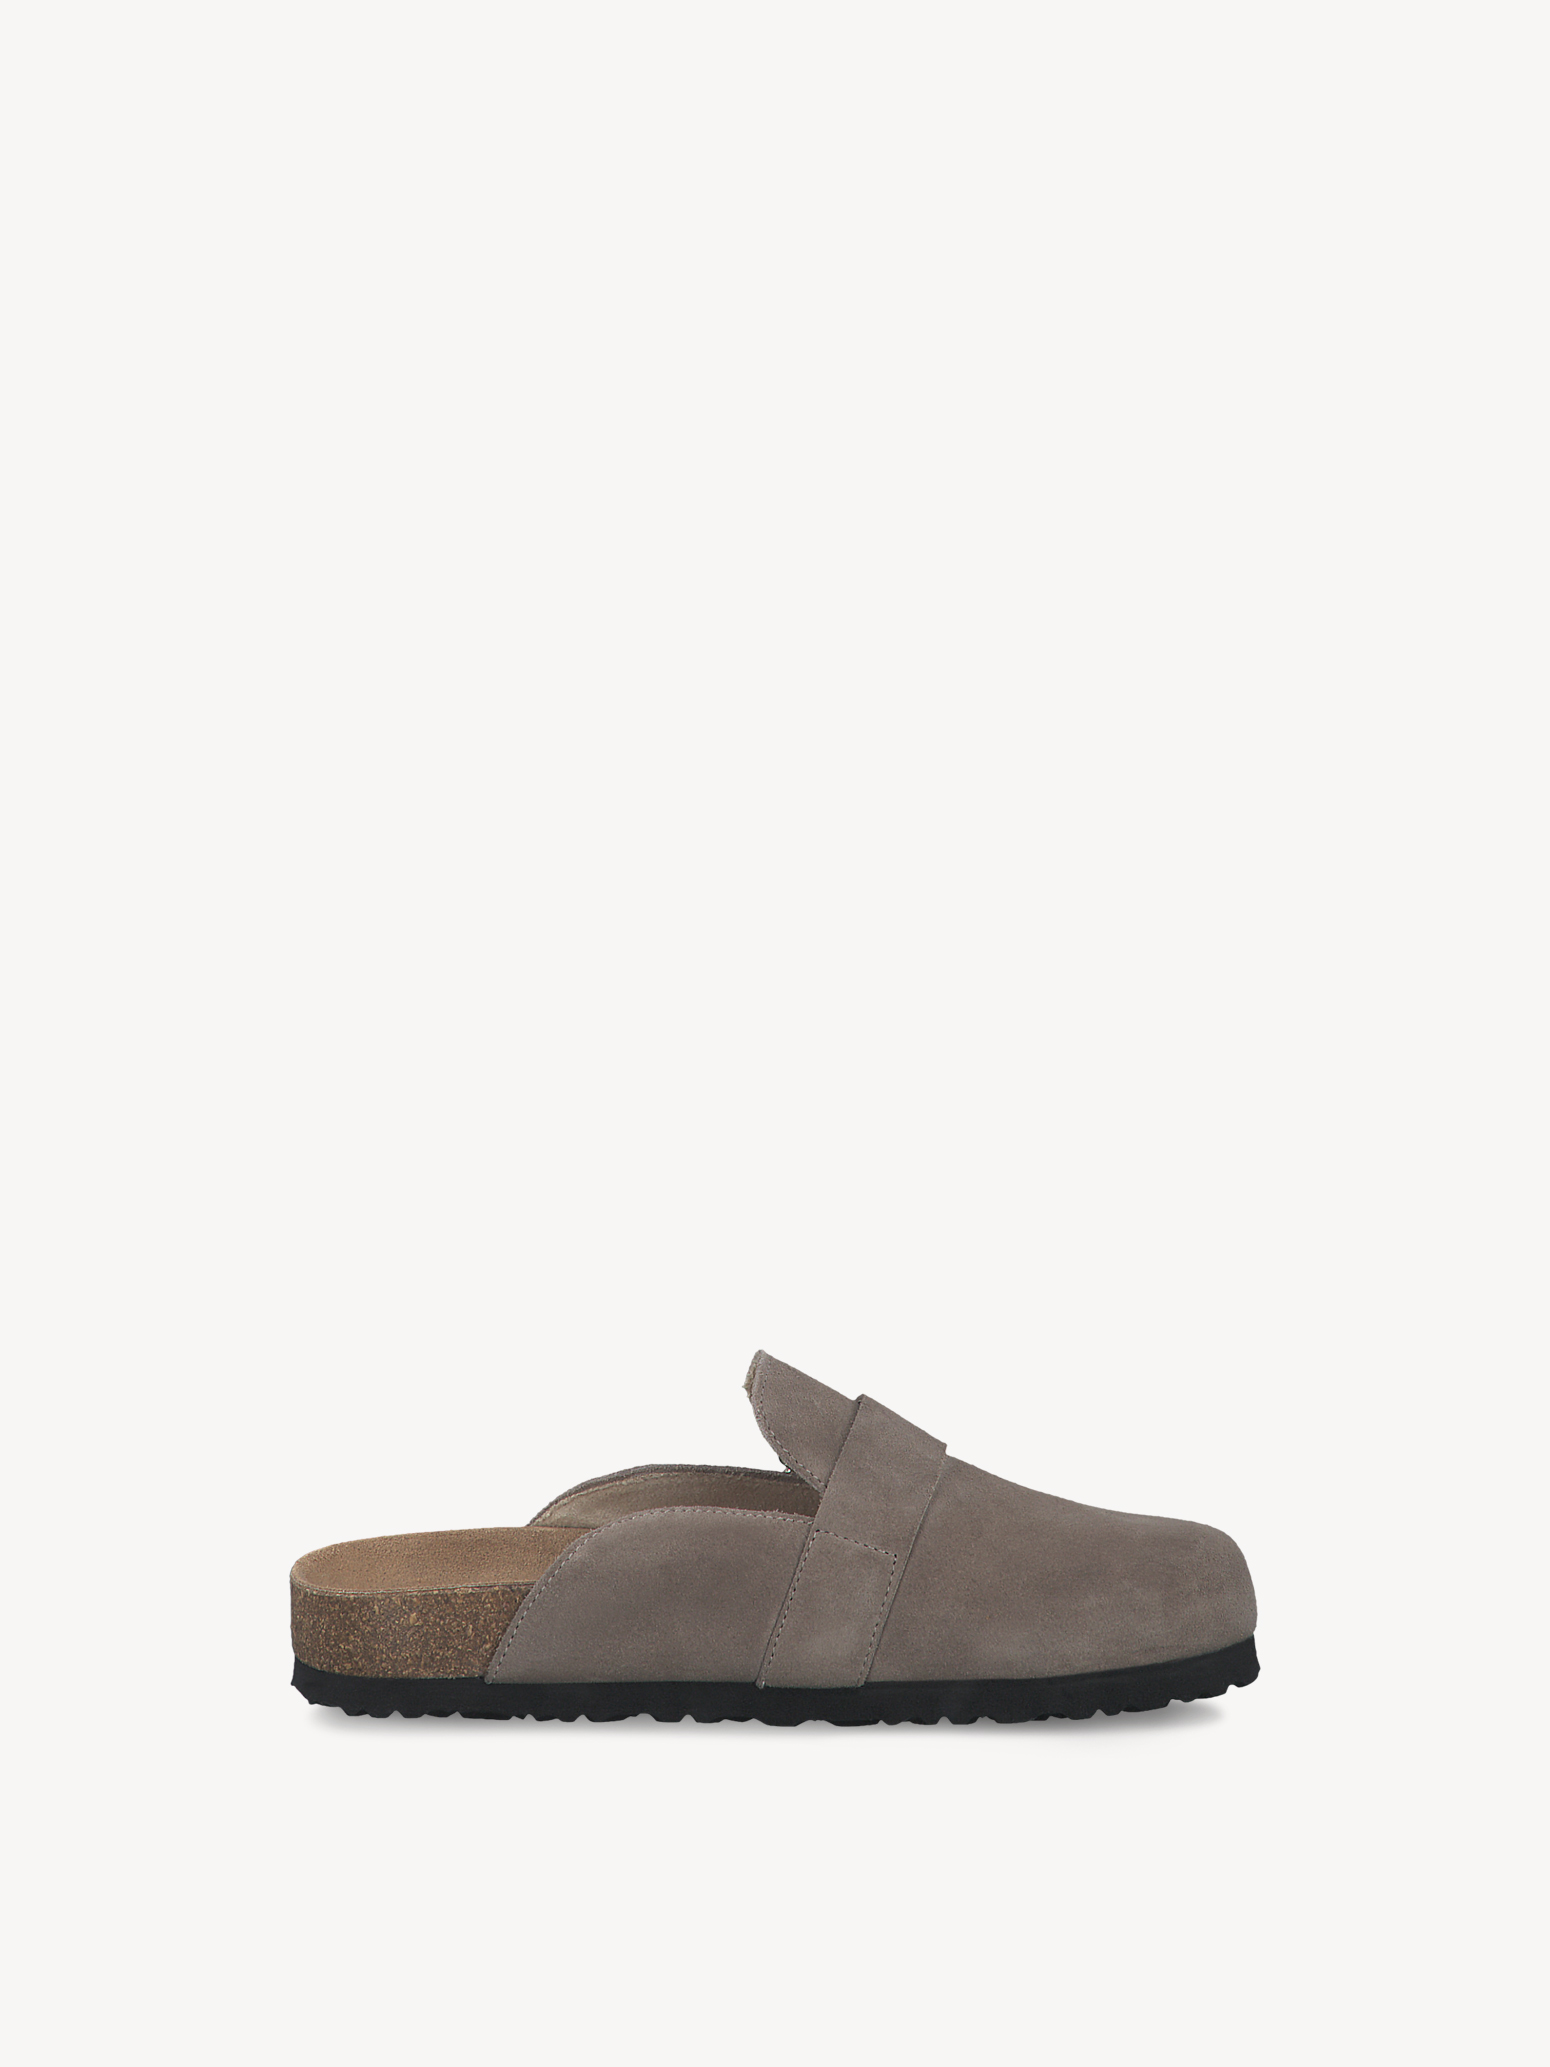 Leather Mule - beige, TAUPE SUEDE, hi-res